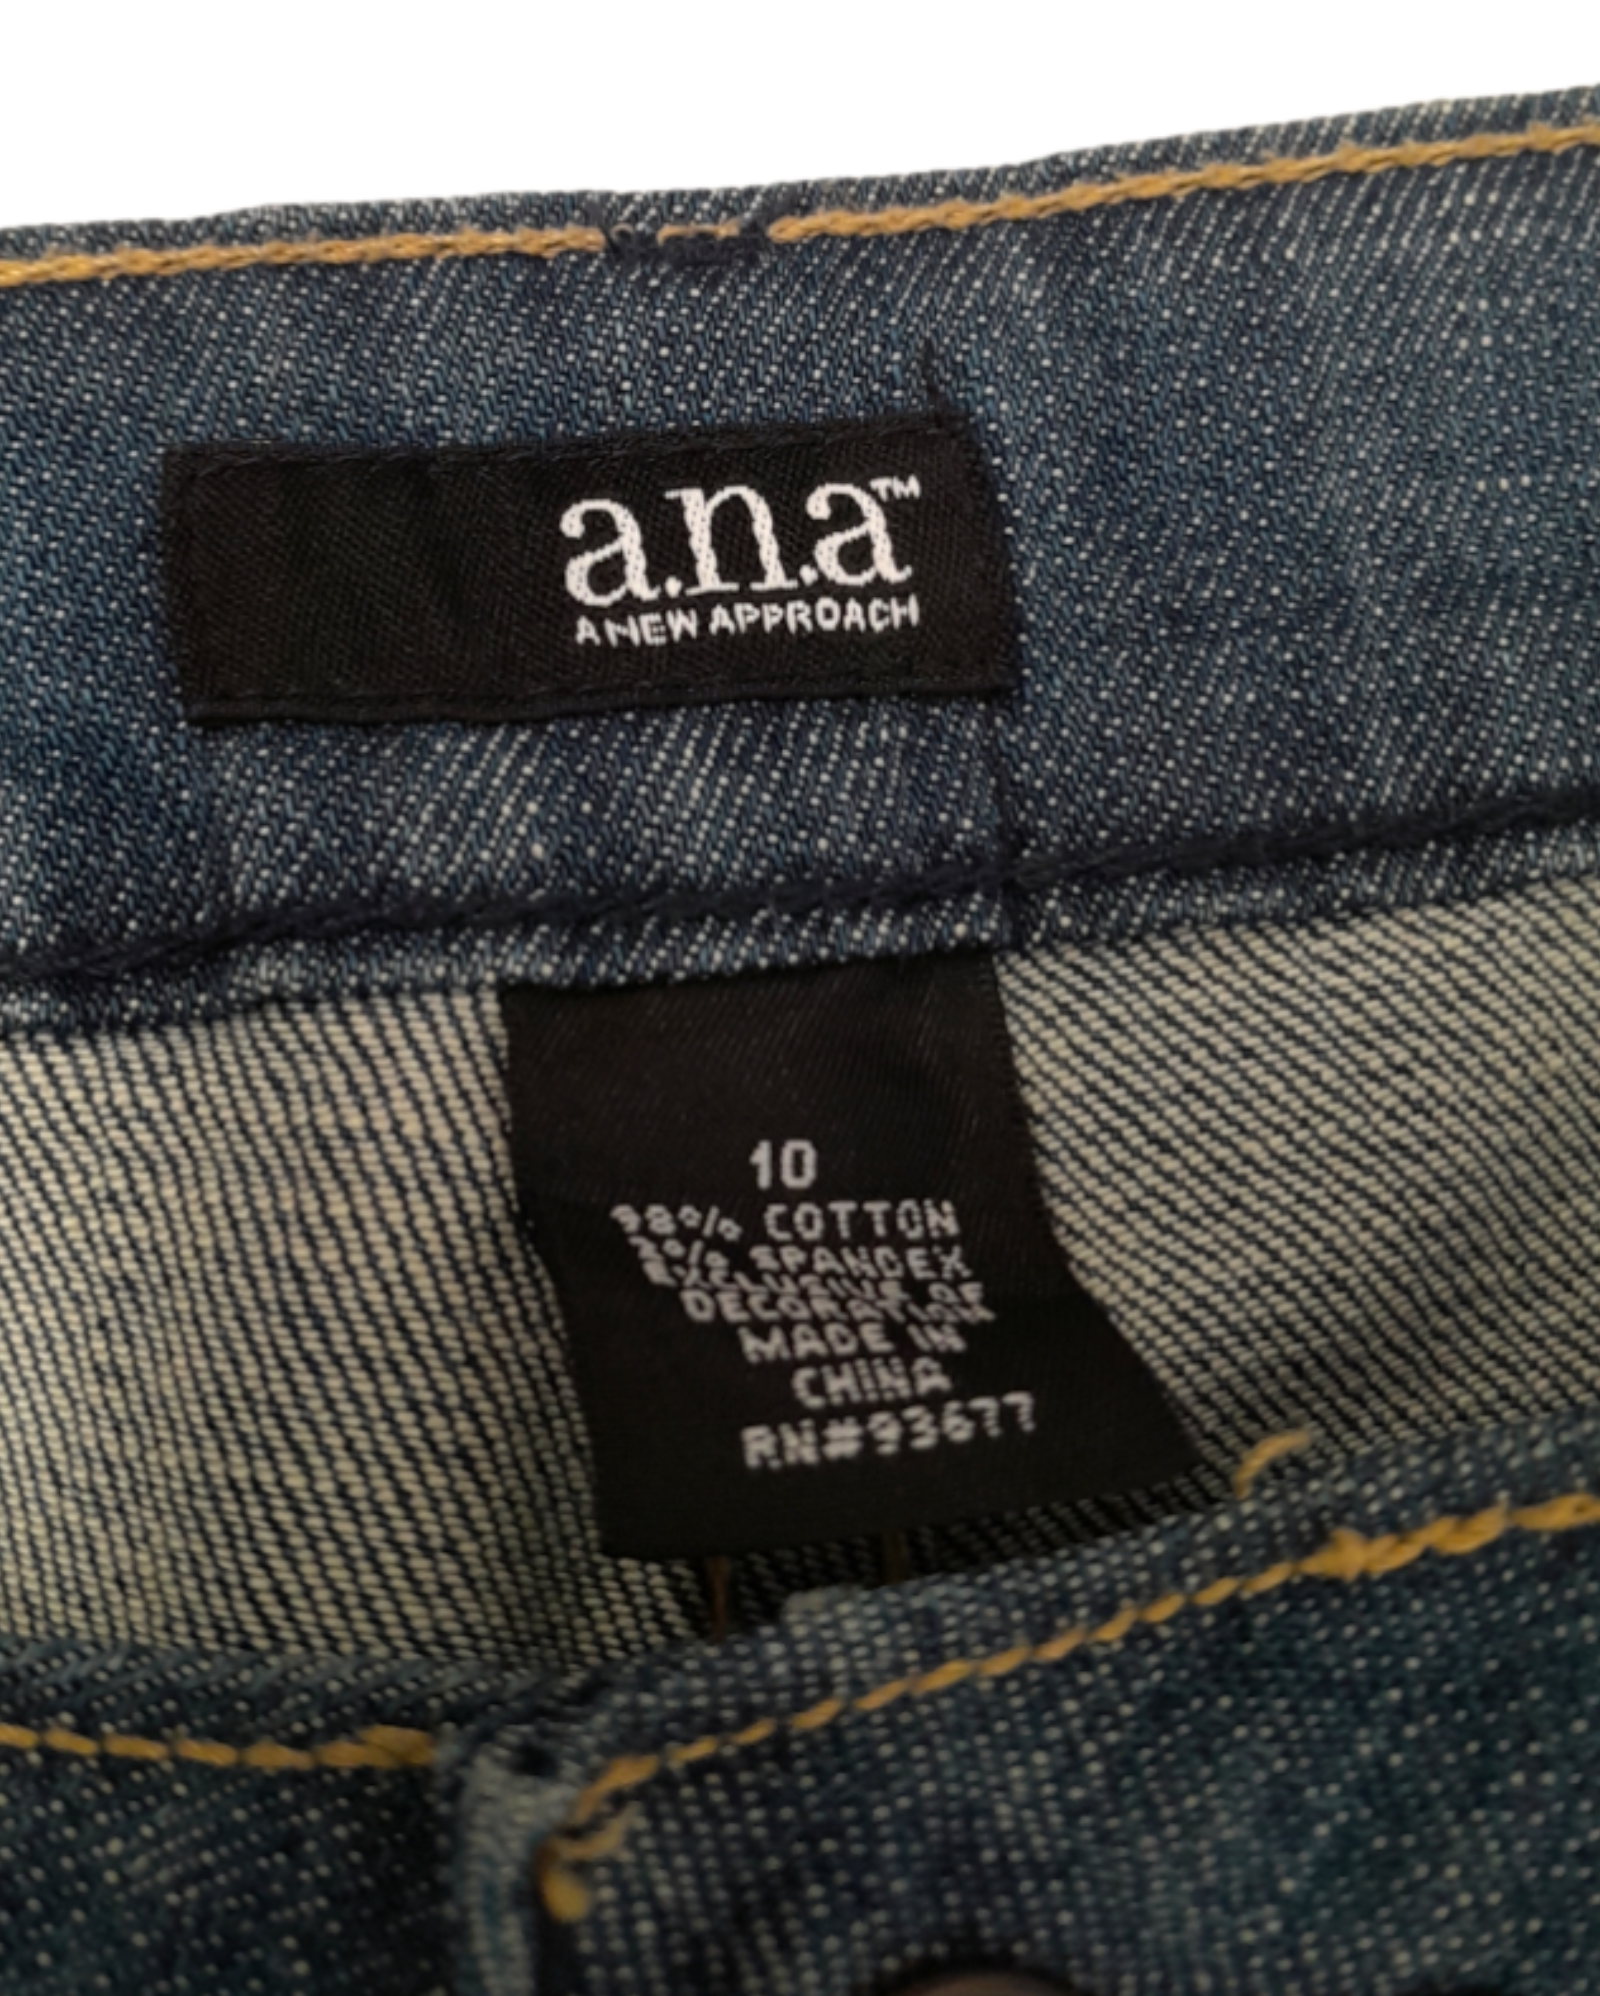 Jeans Rectos Ana a new approacm